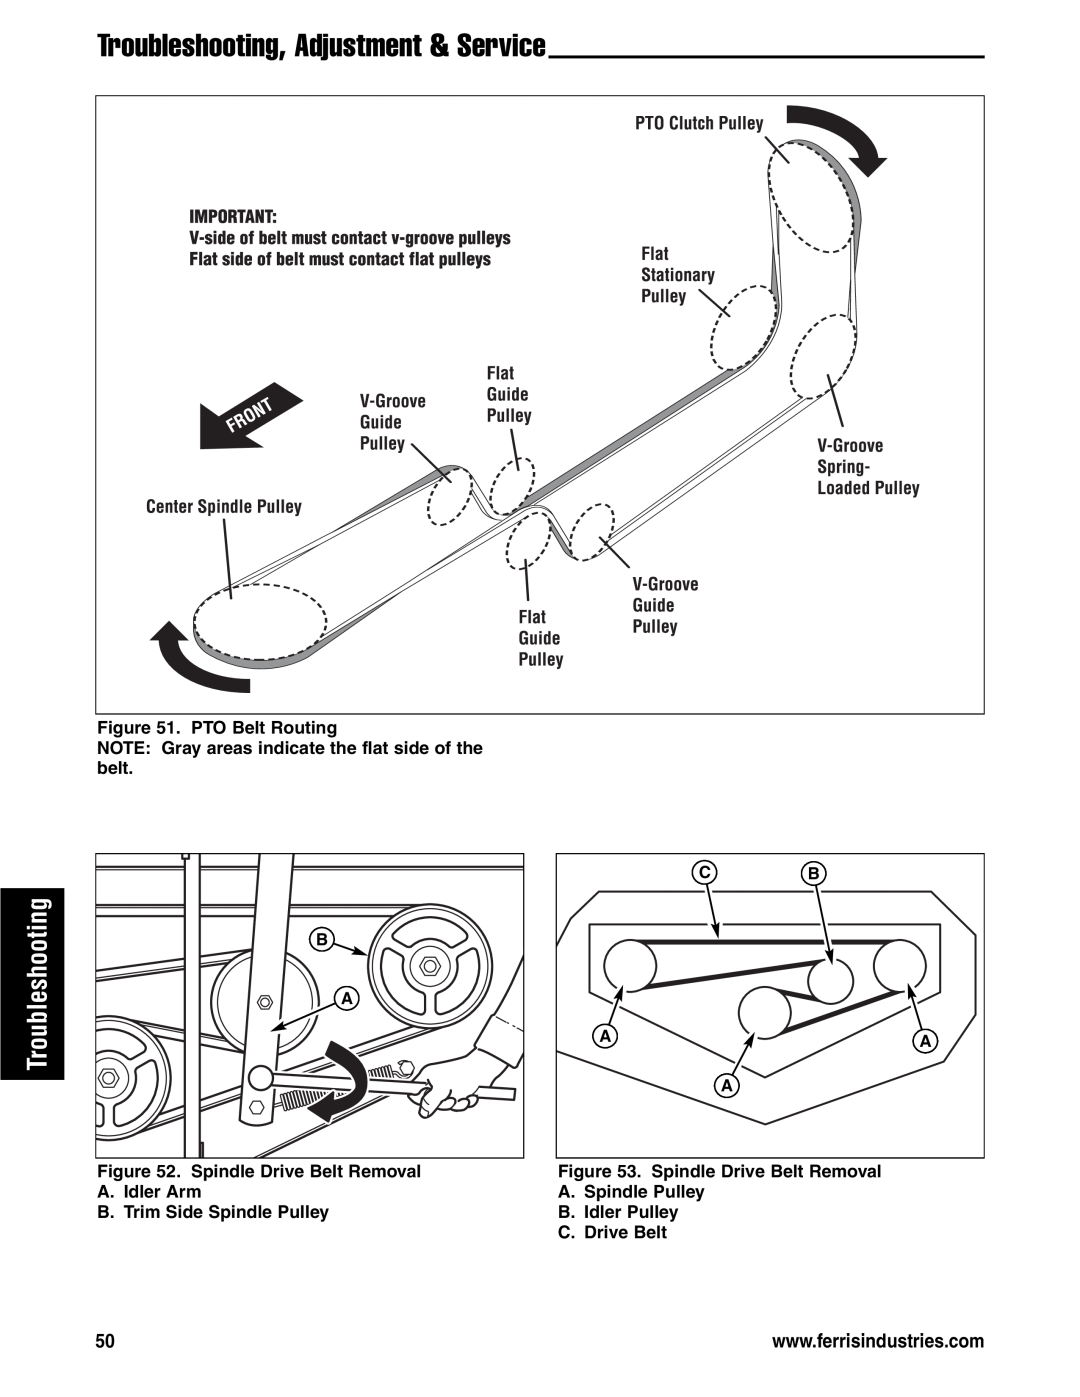 Ferris Industries 5900626, 5901180, 5901181, 5901178, 5901179, 5900621 Troubleshooting, Adjustment & Service, PTO Belt Routing 